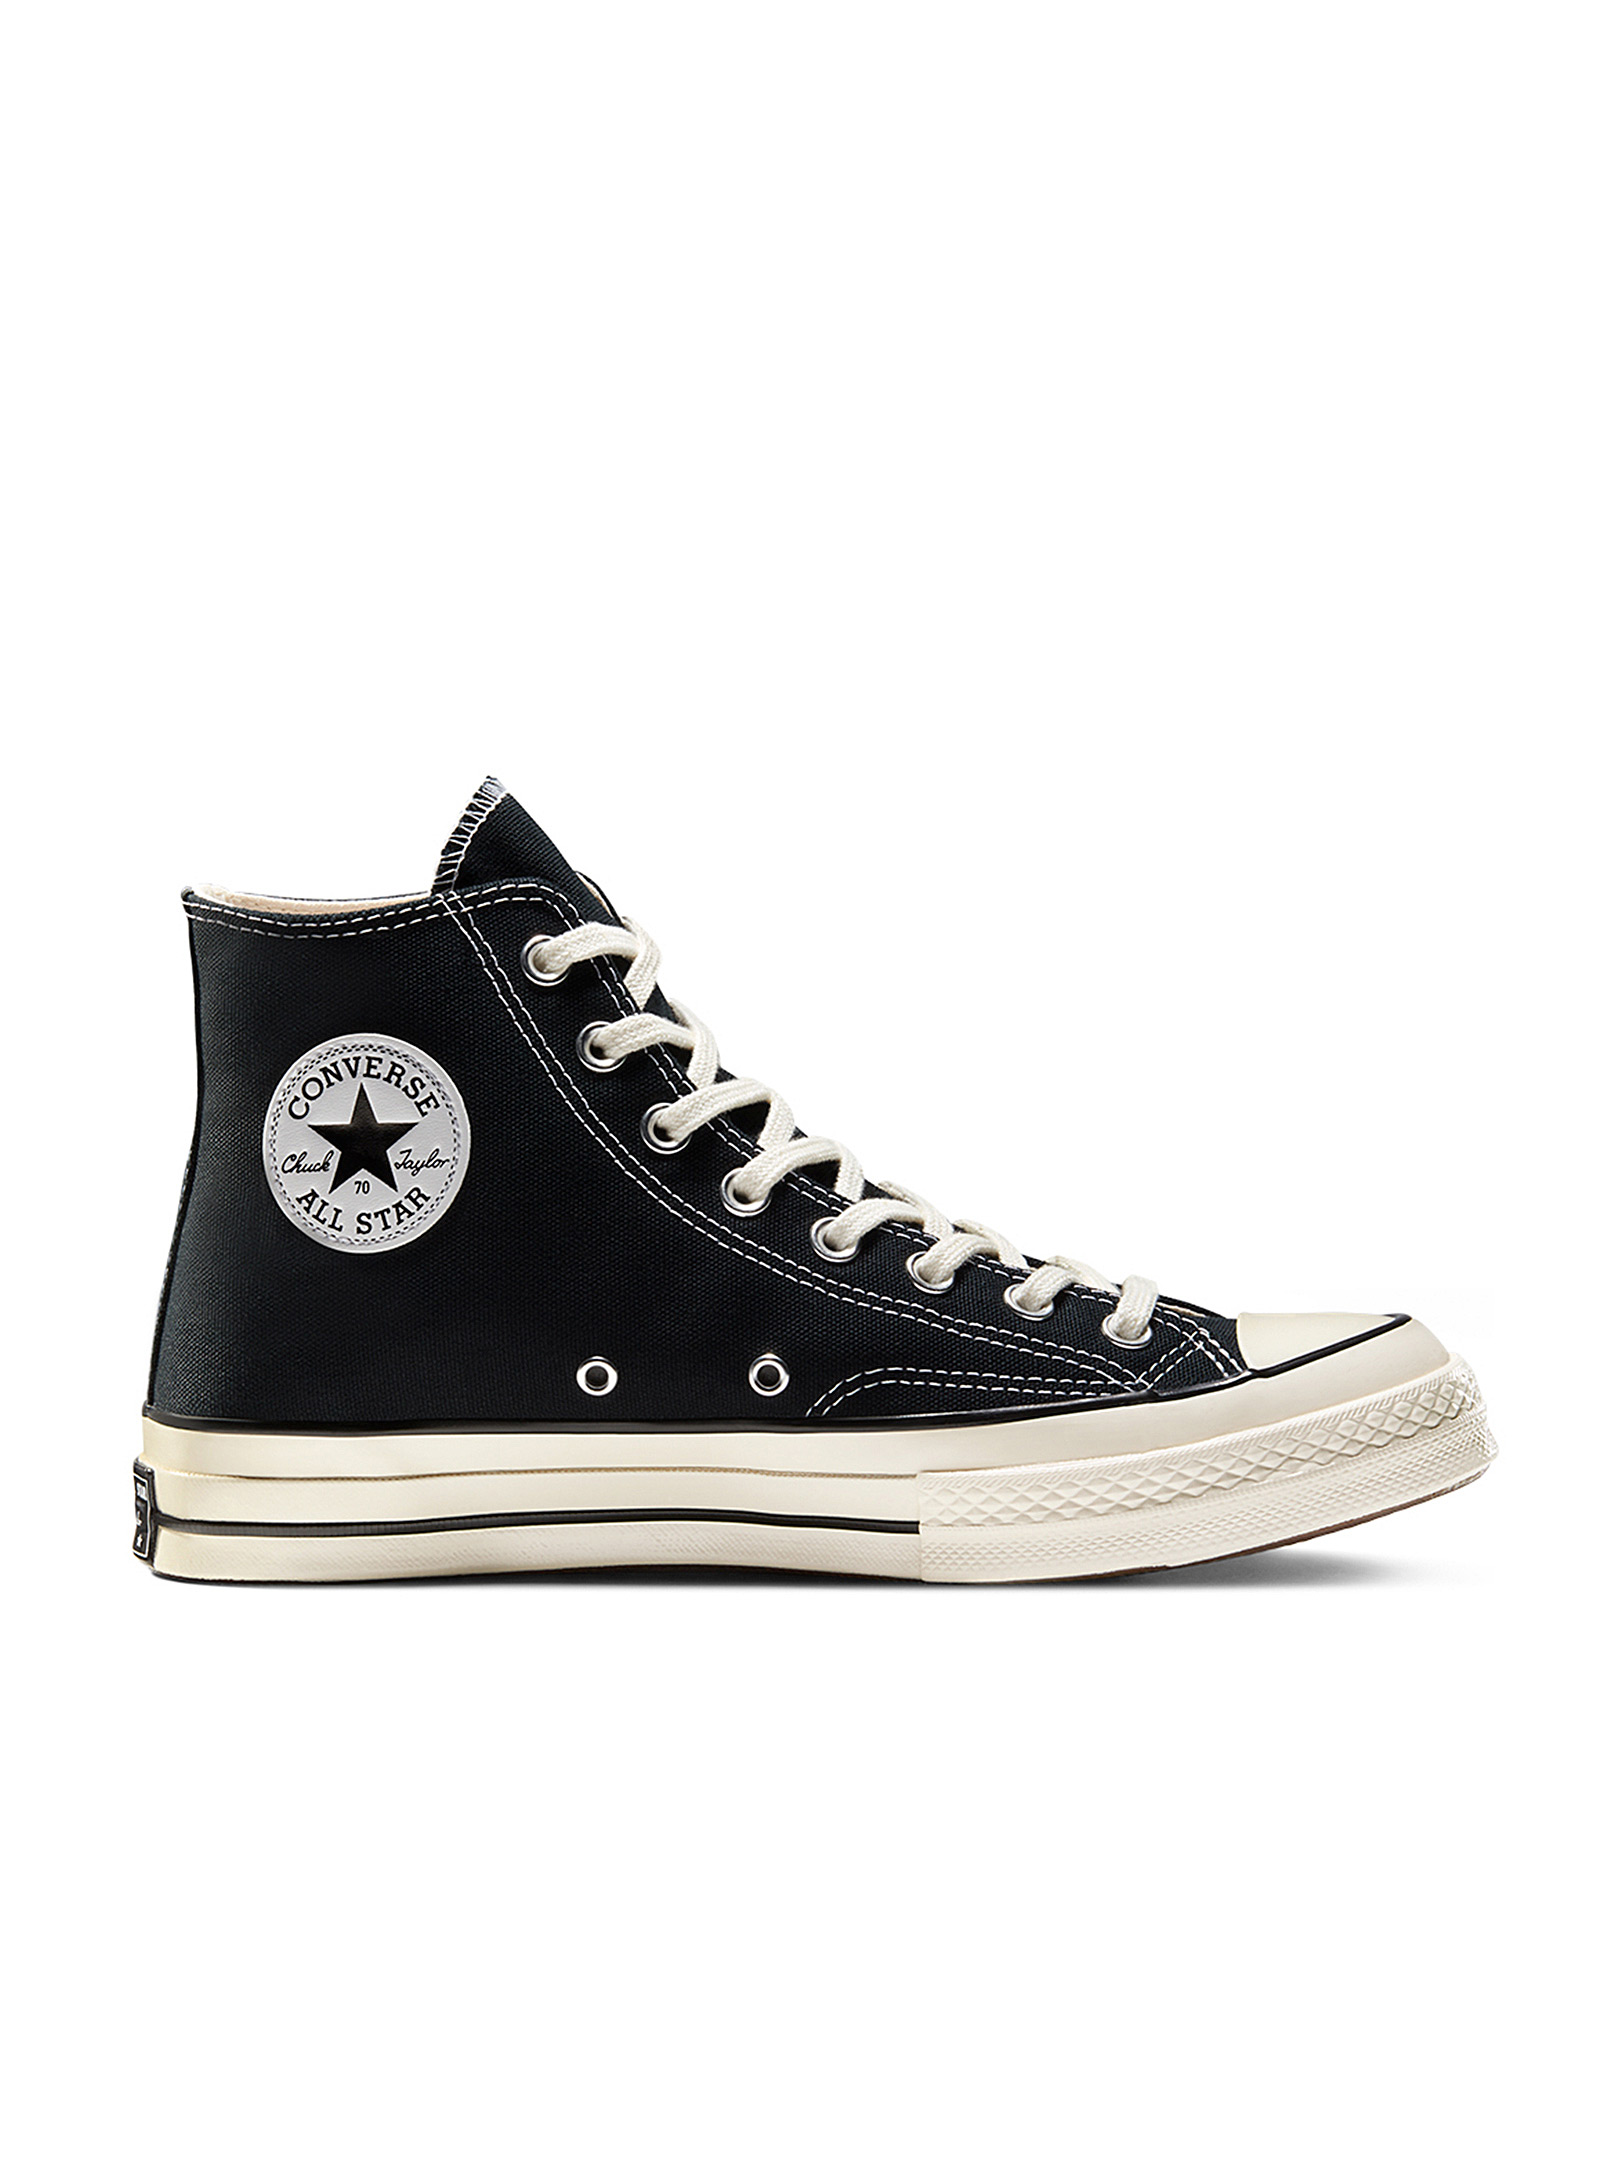 Converse Chuck 70 High Top Black Sneakers Men In Black And White